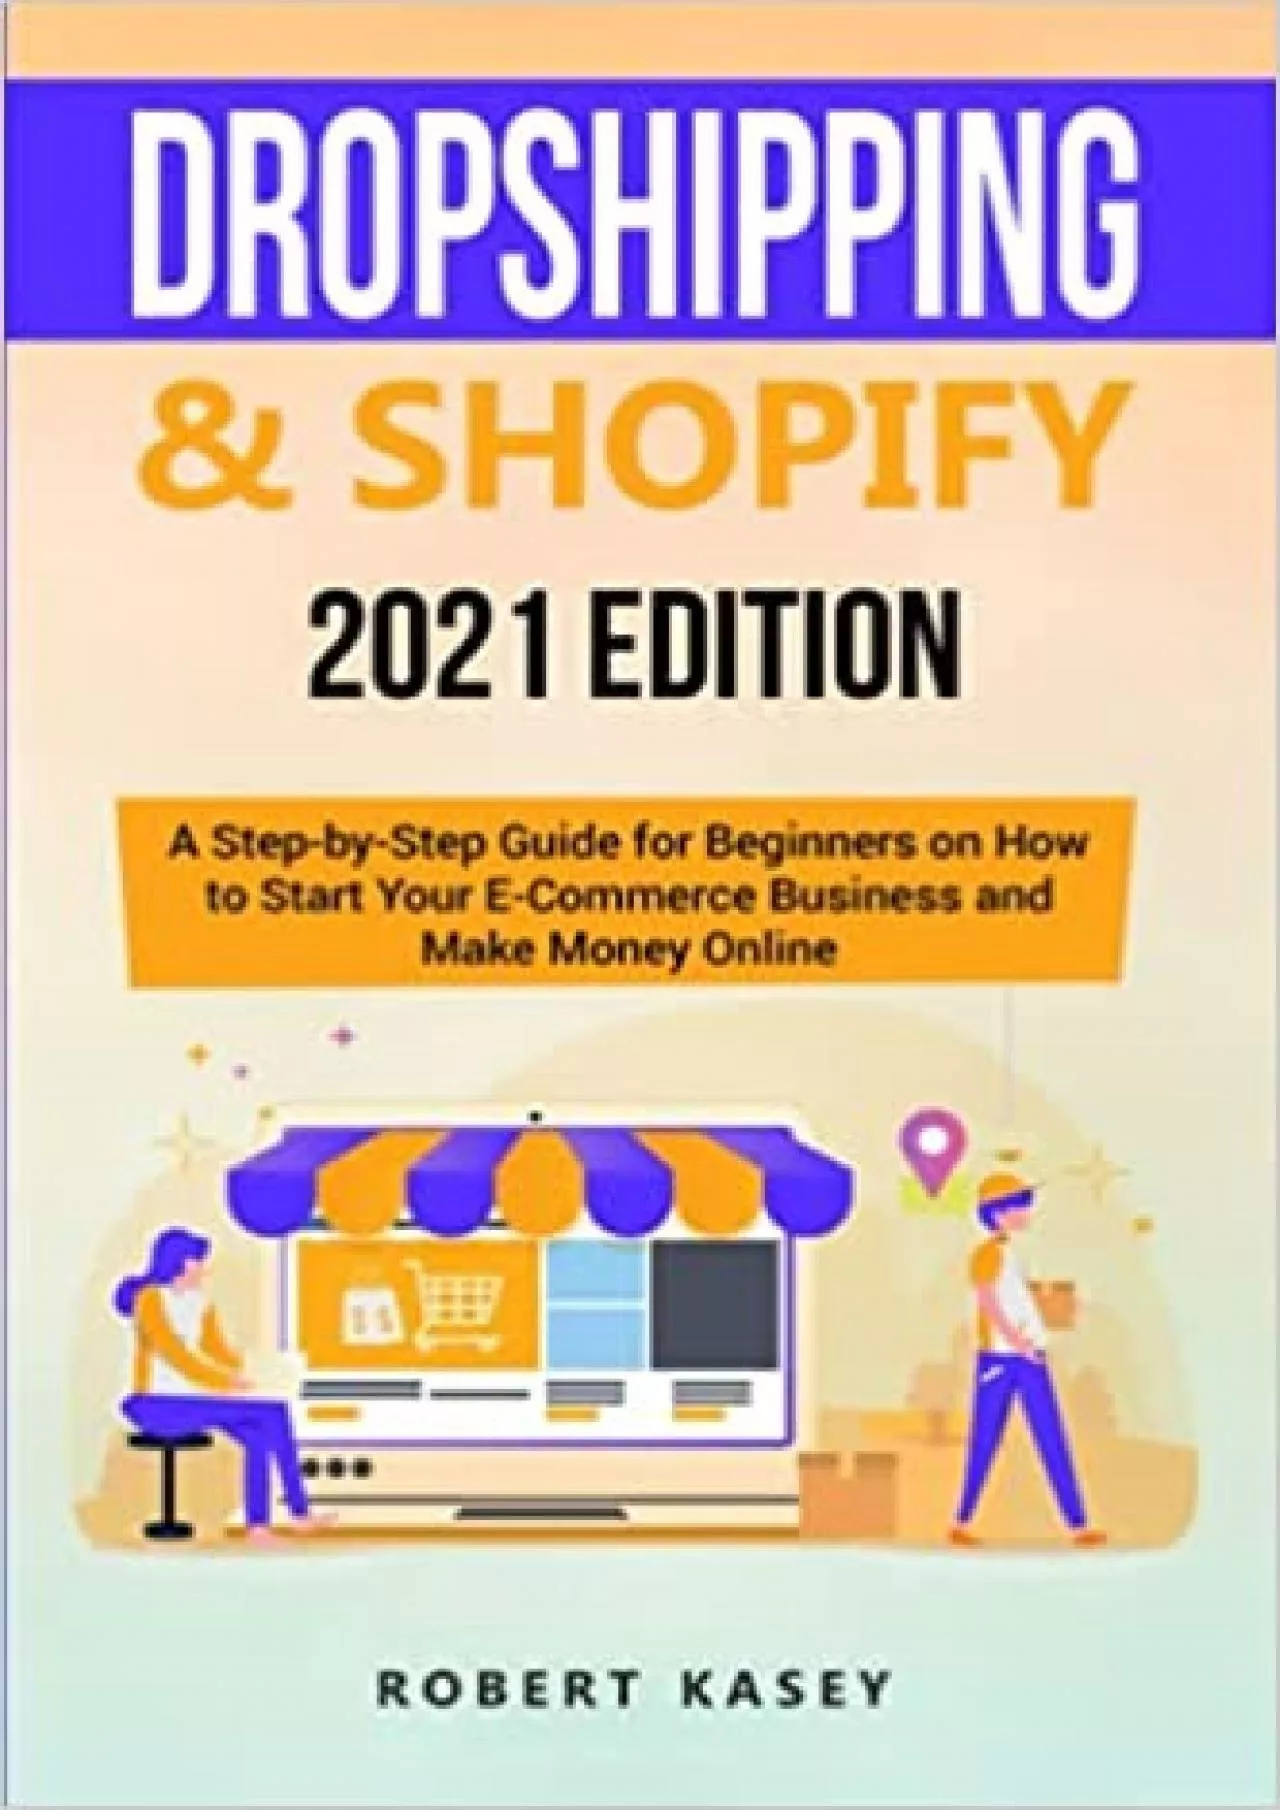 Dropshipping  Shopify 2021 Edition - A Step-by-Step Guide for Beginners on How to Start